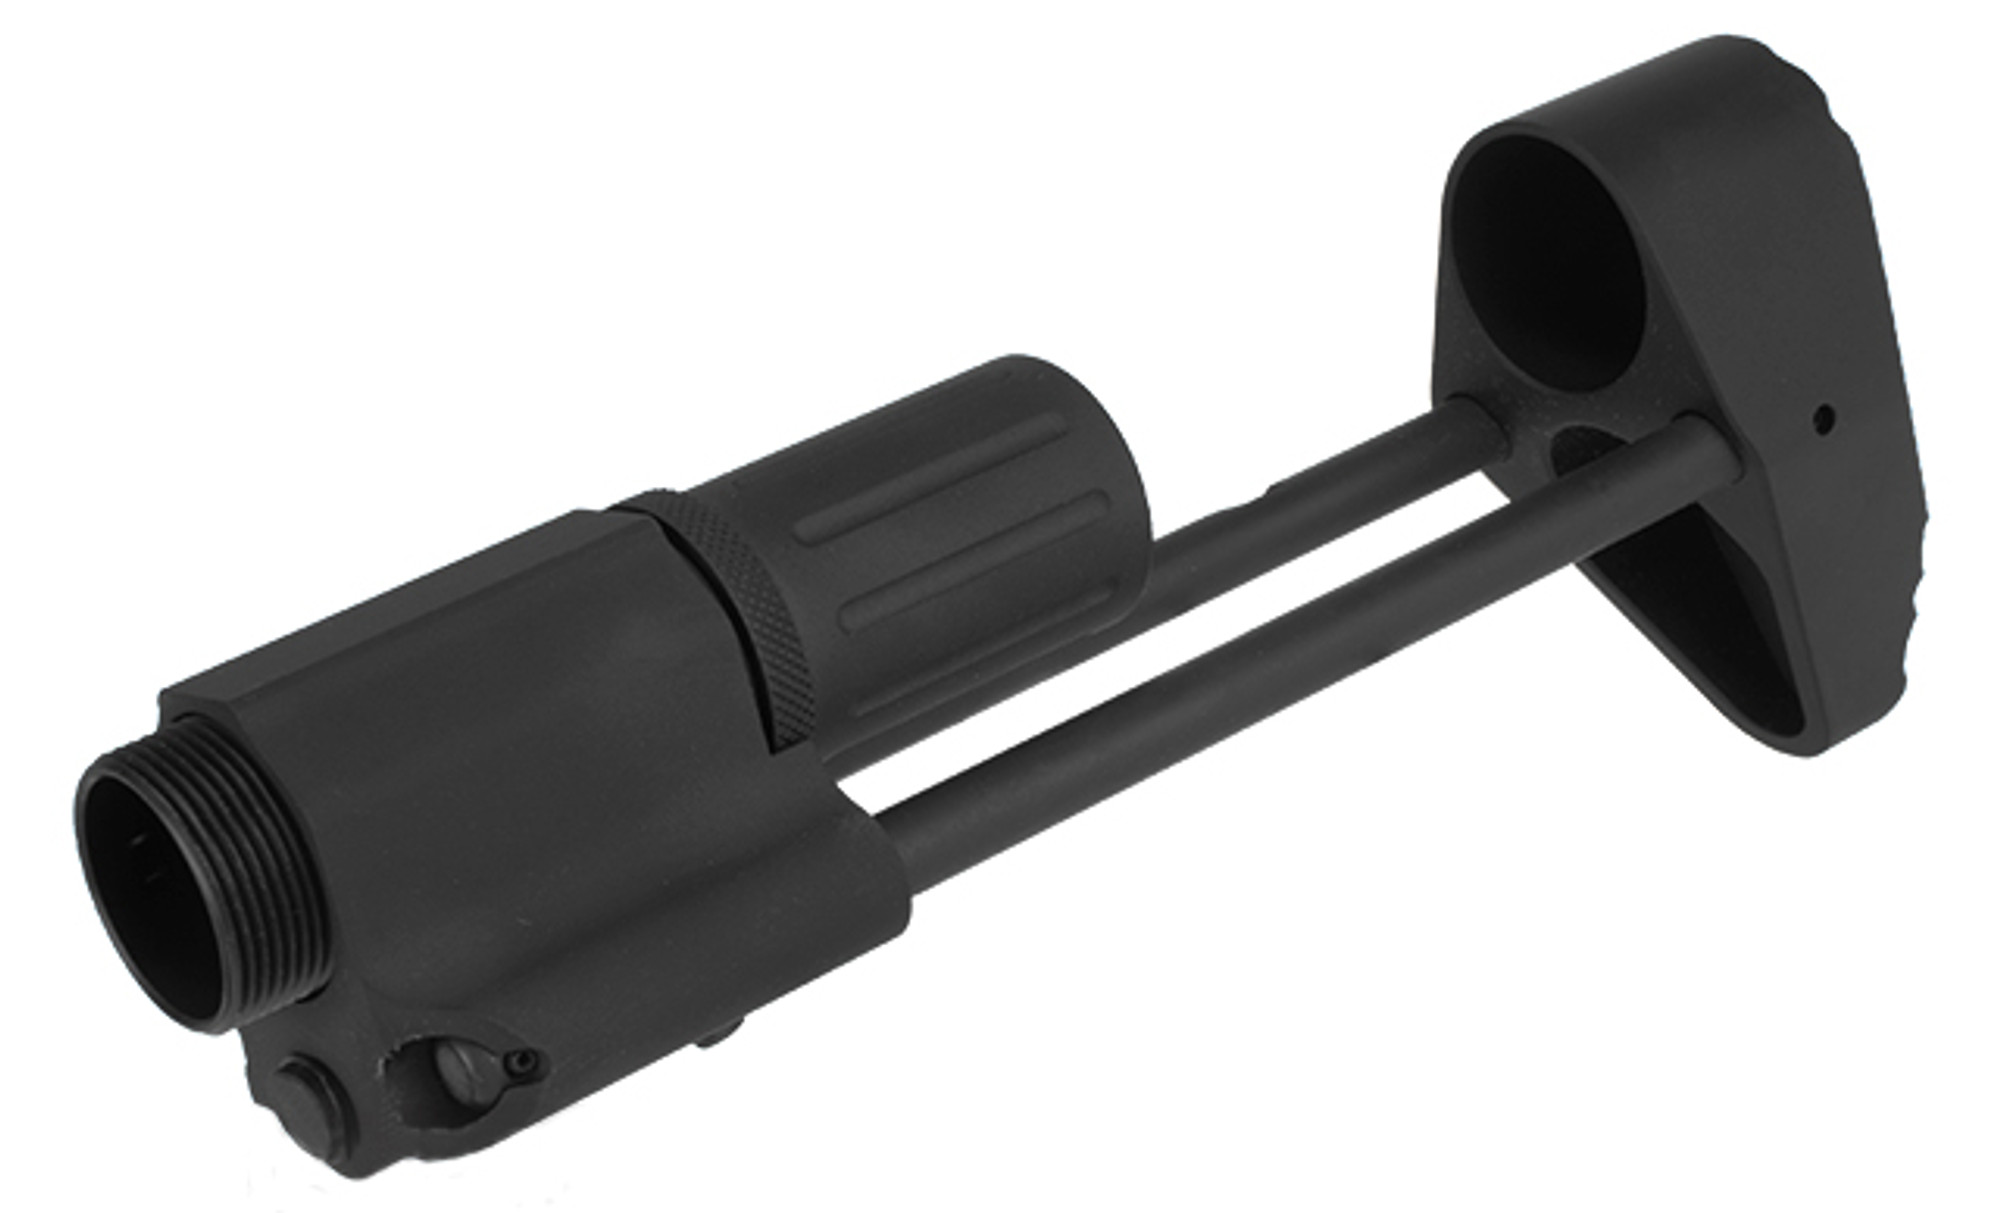 SVOBODA Compact Carbine Stock For M4 Gas Blowback Series Rifles